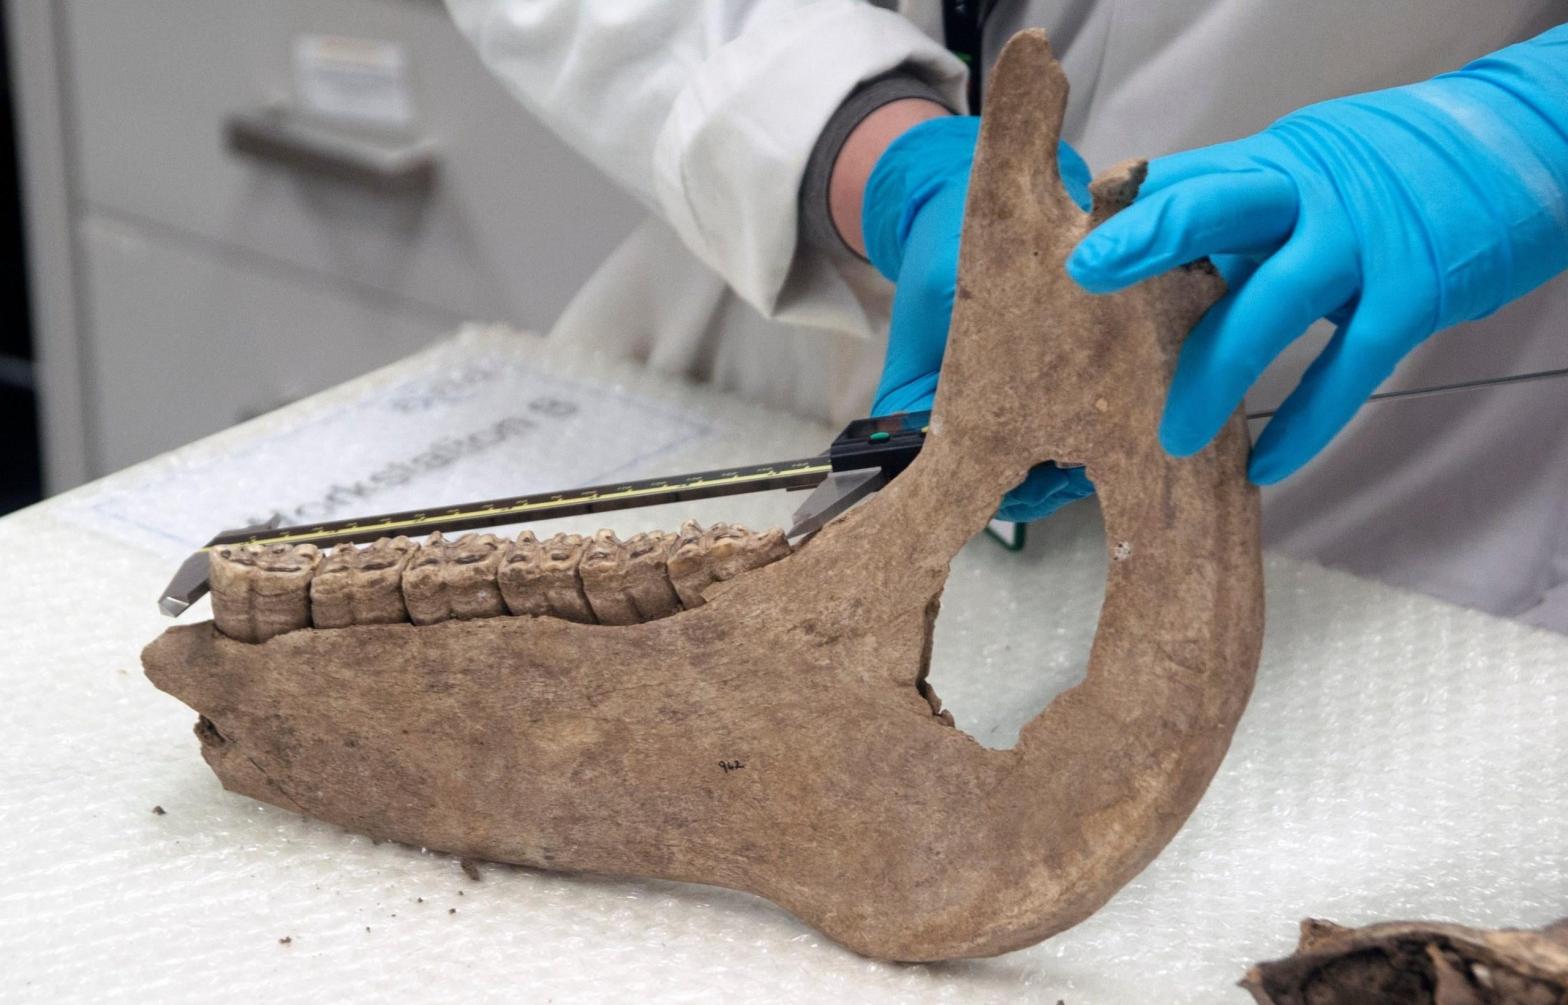 The mandible of a horse. (Photo: Dr. Katherine Kanne / The University of Exeter)